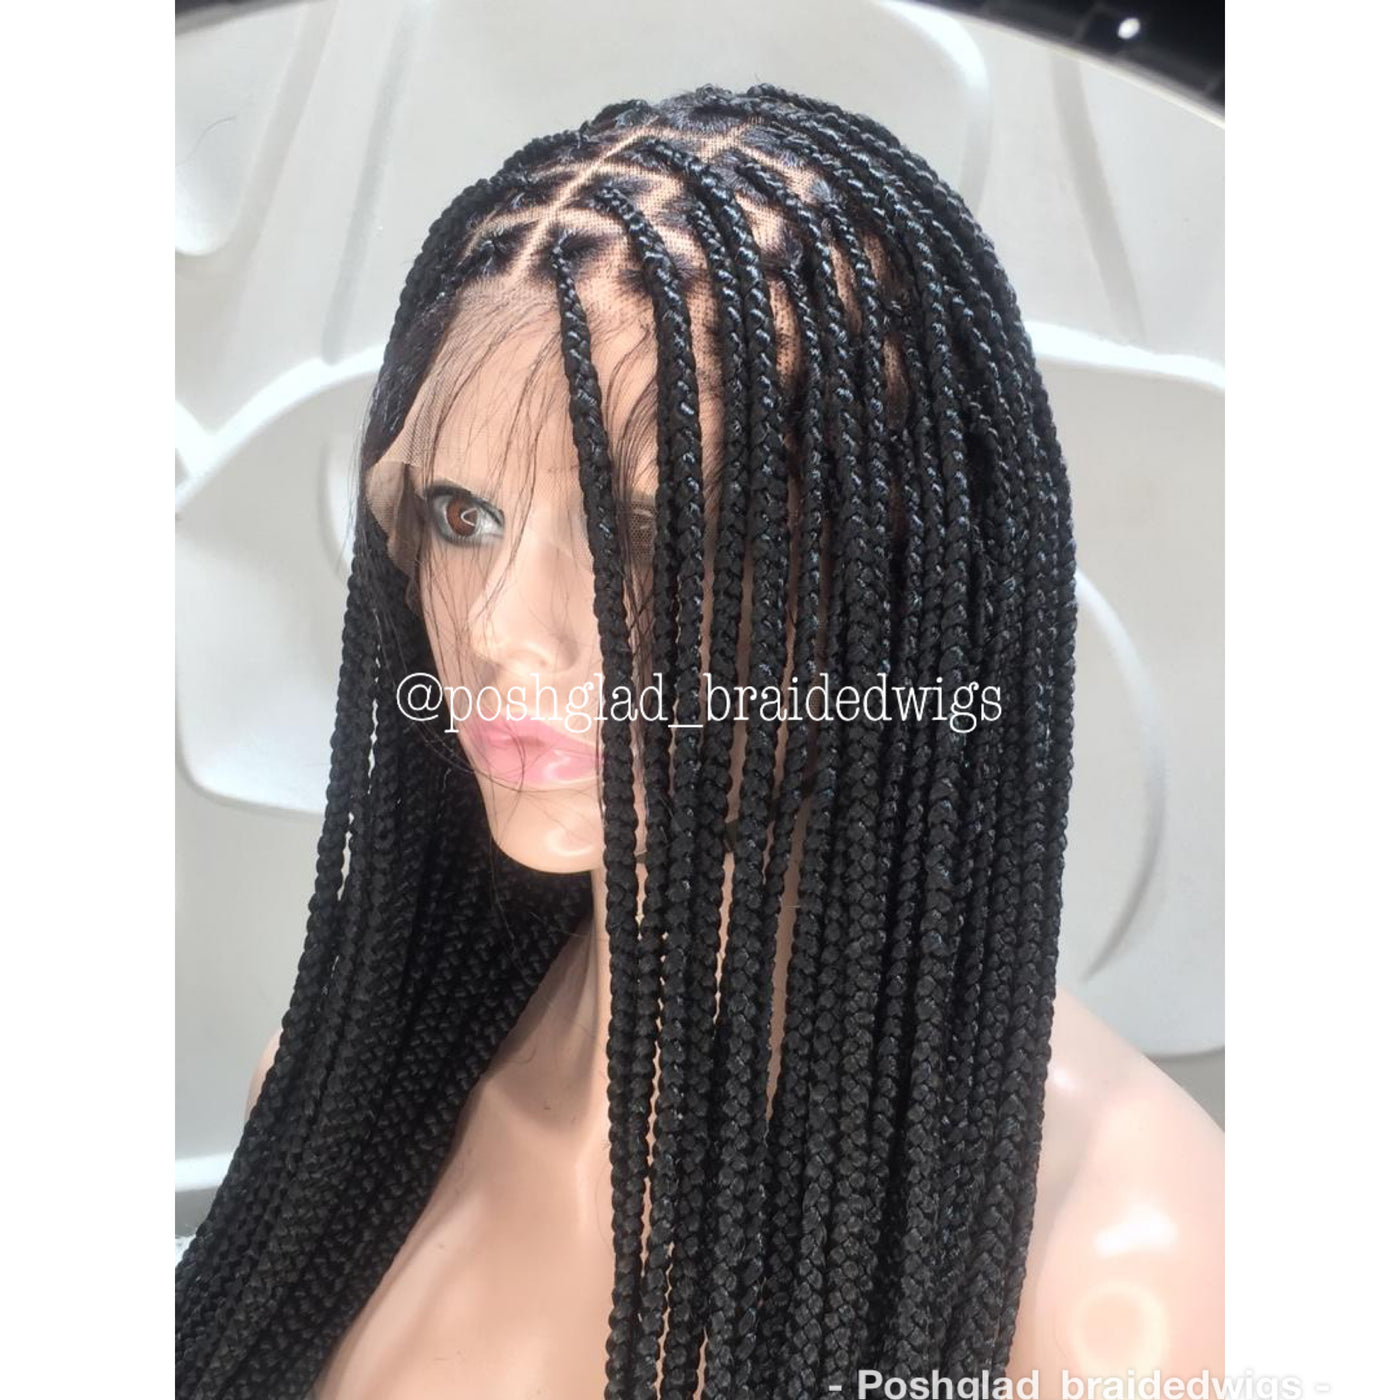 Shade Knotless Braid Wig "Swiss Full Lace" (Erica) Poshglad Braided Wigs Knotless Braid Wig